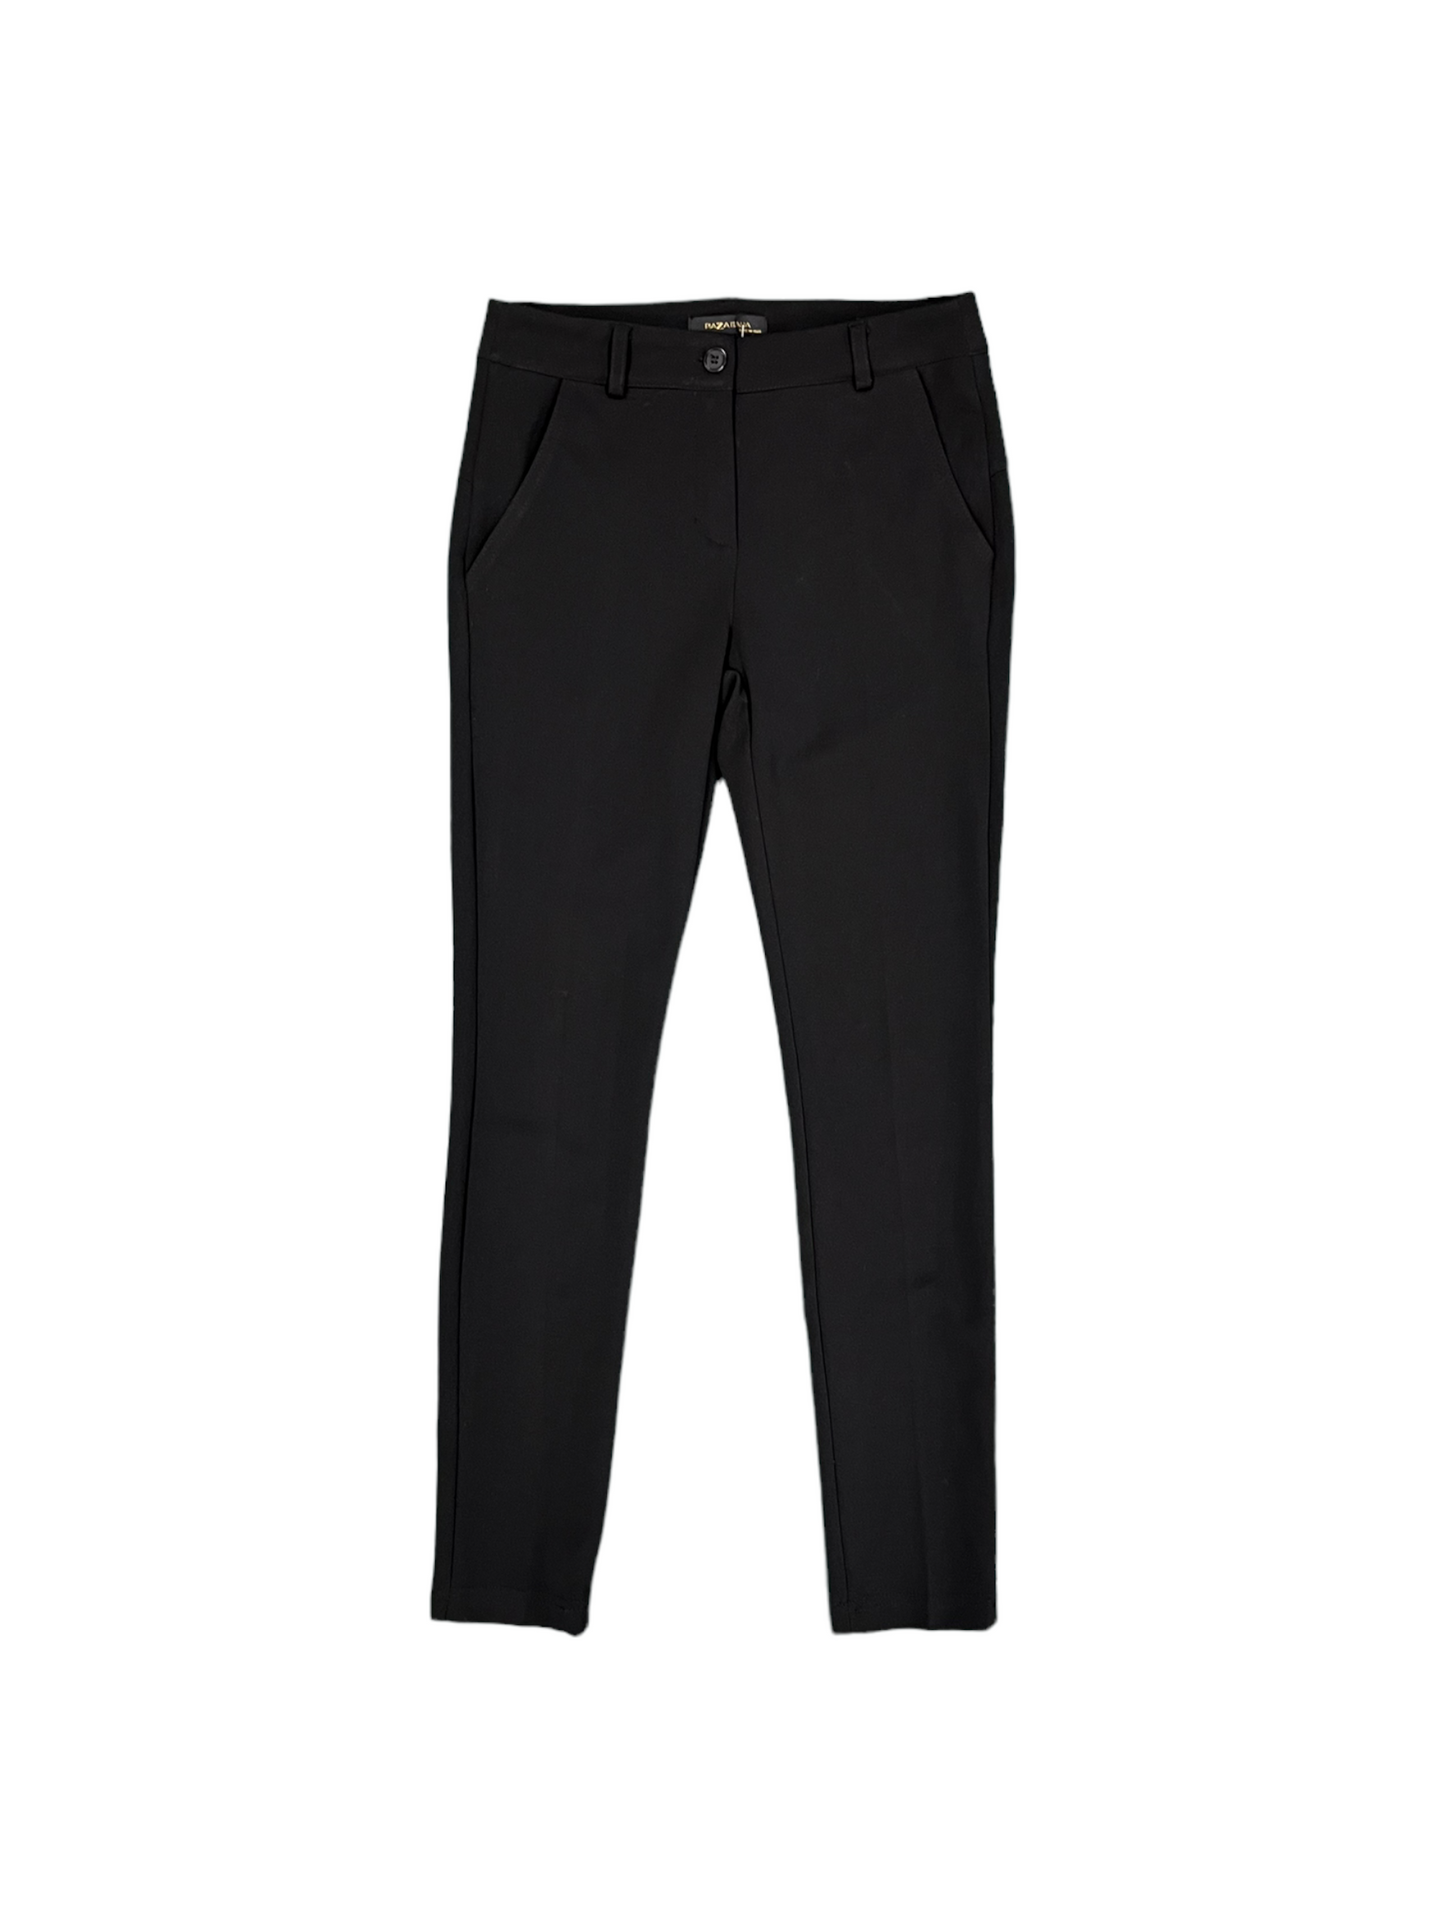 Womens Fitted Trousers - Waist 28" Length 28"